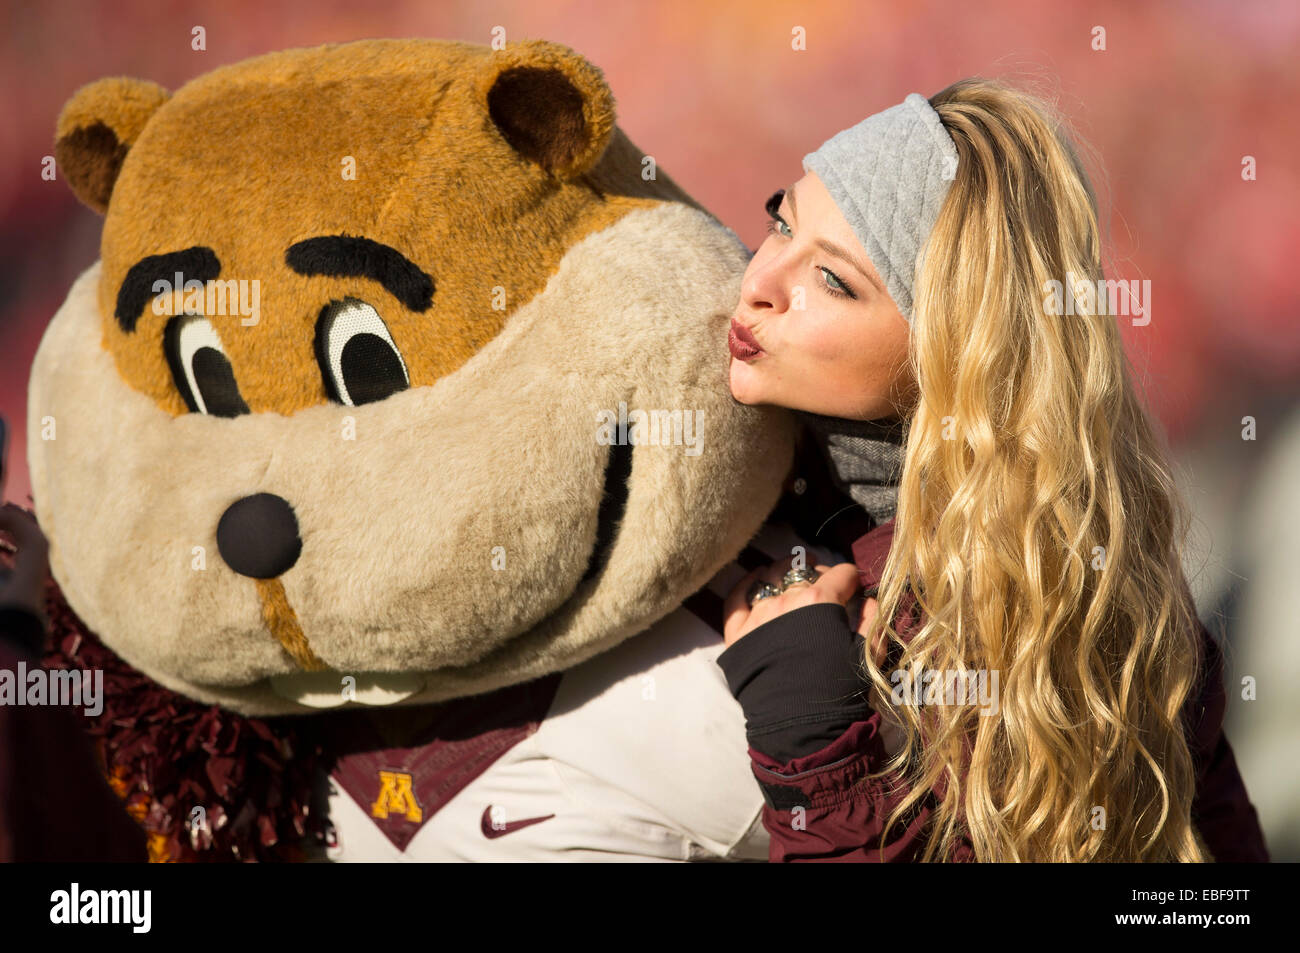 November 29, 2014: A Minnesota cheerleader jumps onto the back of mascot Goldy and blows him a kiss before the NCAA Football game between the Minnesota Golden Gophers and the Wisconsin Badgers at Camp Randall Stadium in Madison, WI. Wisconsin defeated Minnesota 34-24. John Fisher/CSM Stock Photo